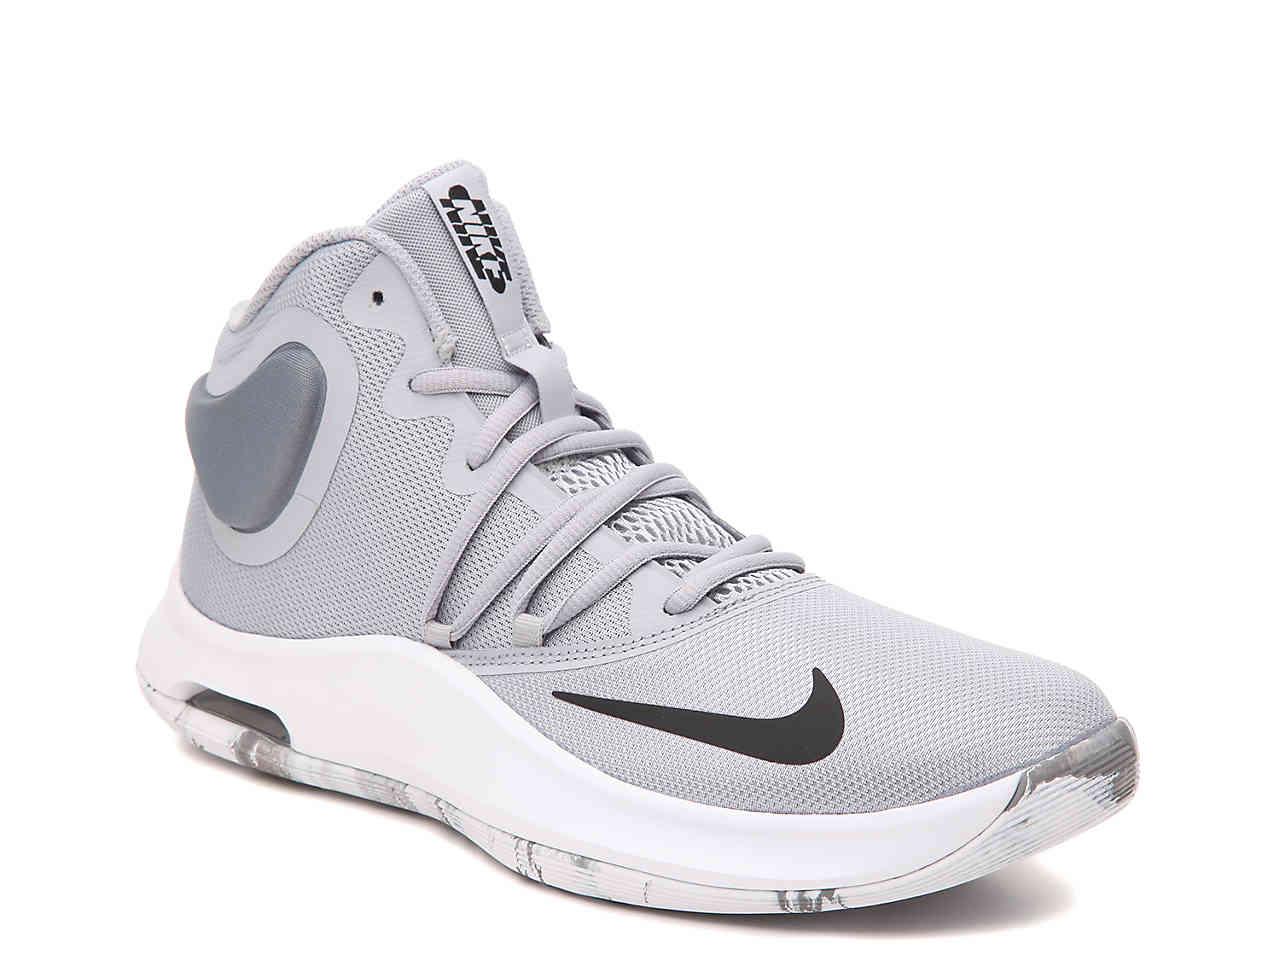 Nike Synthetic Air Versatile Iv Basketball Shoe in Grey (Gray) for Men -  Lyst